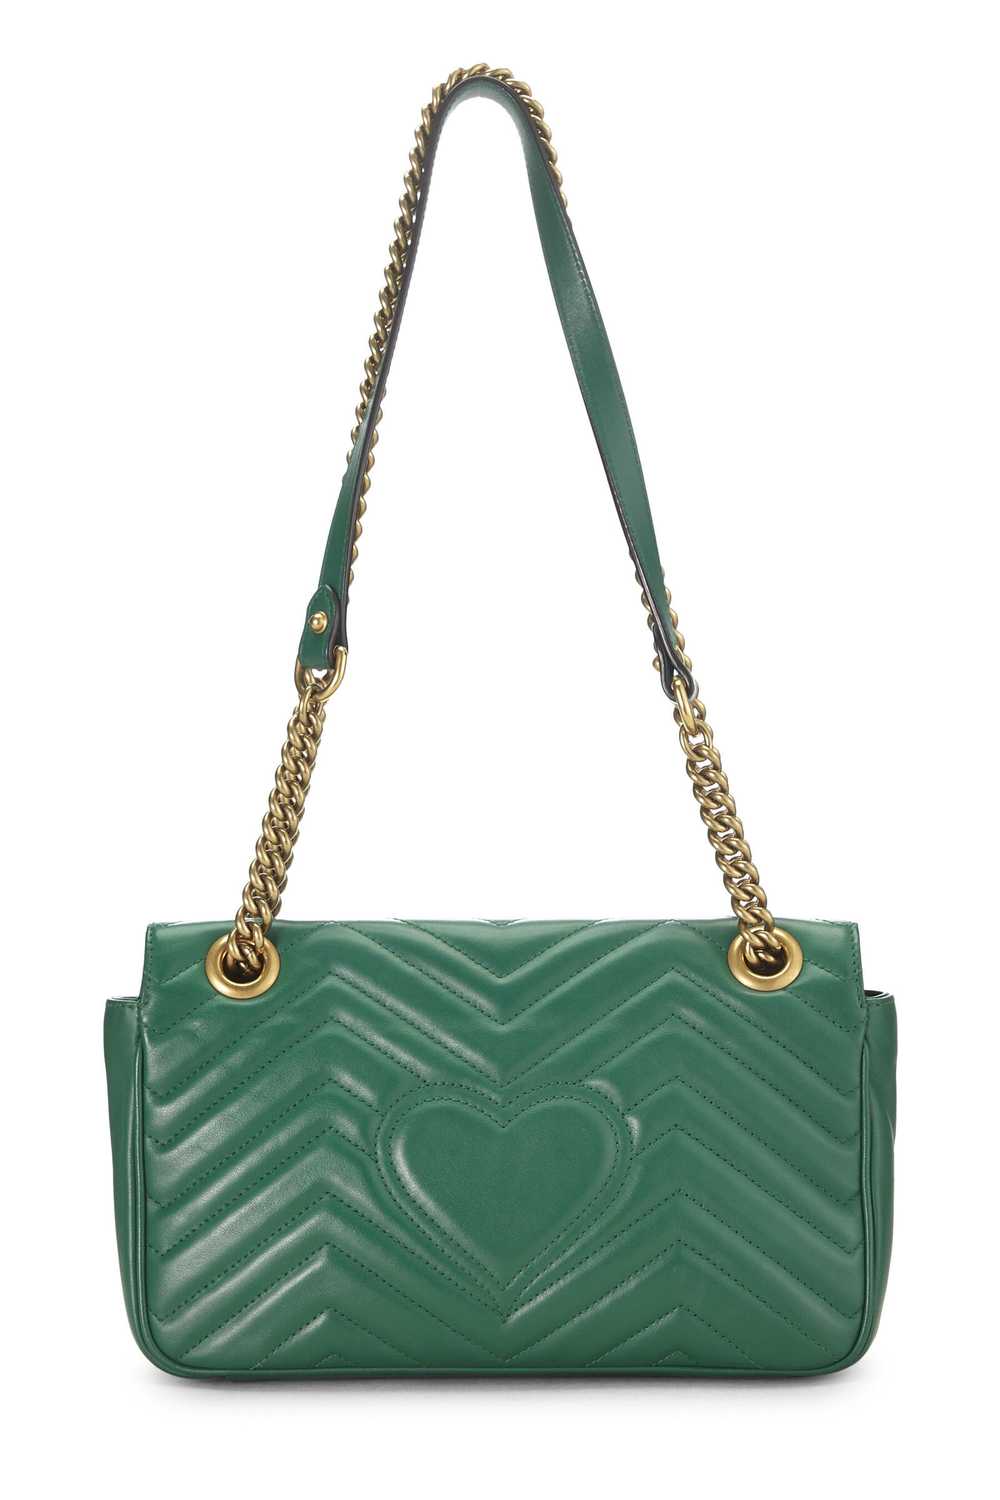 Green Leather GG Marmont Shoulder Bag Small - image 4